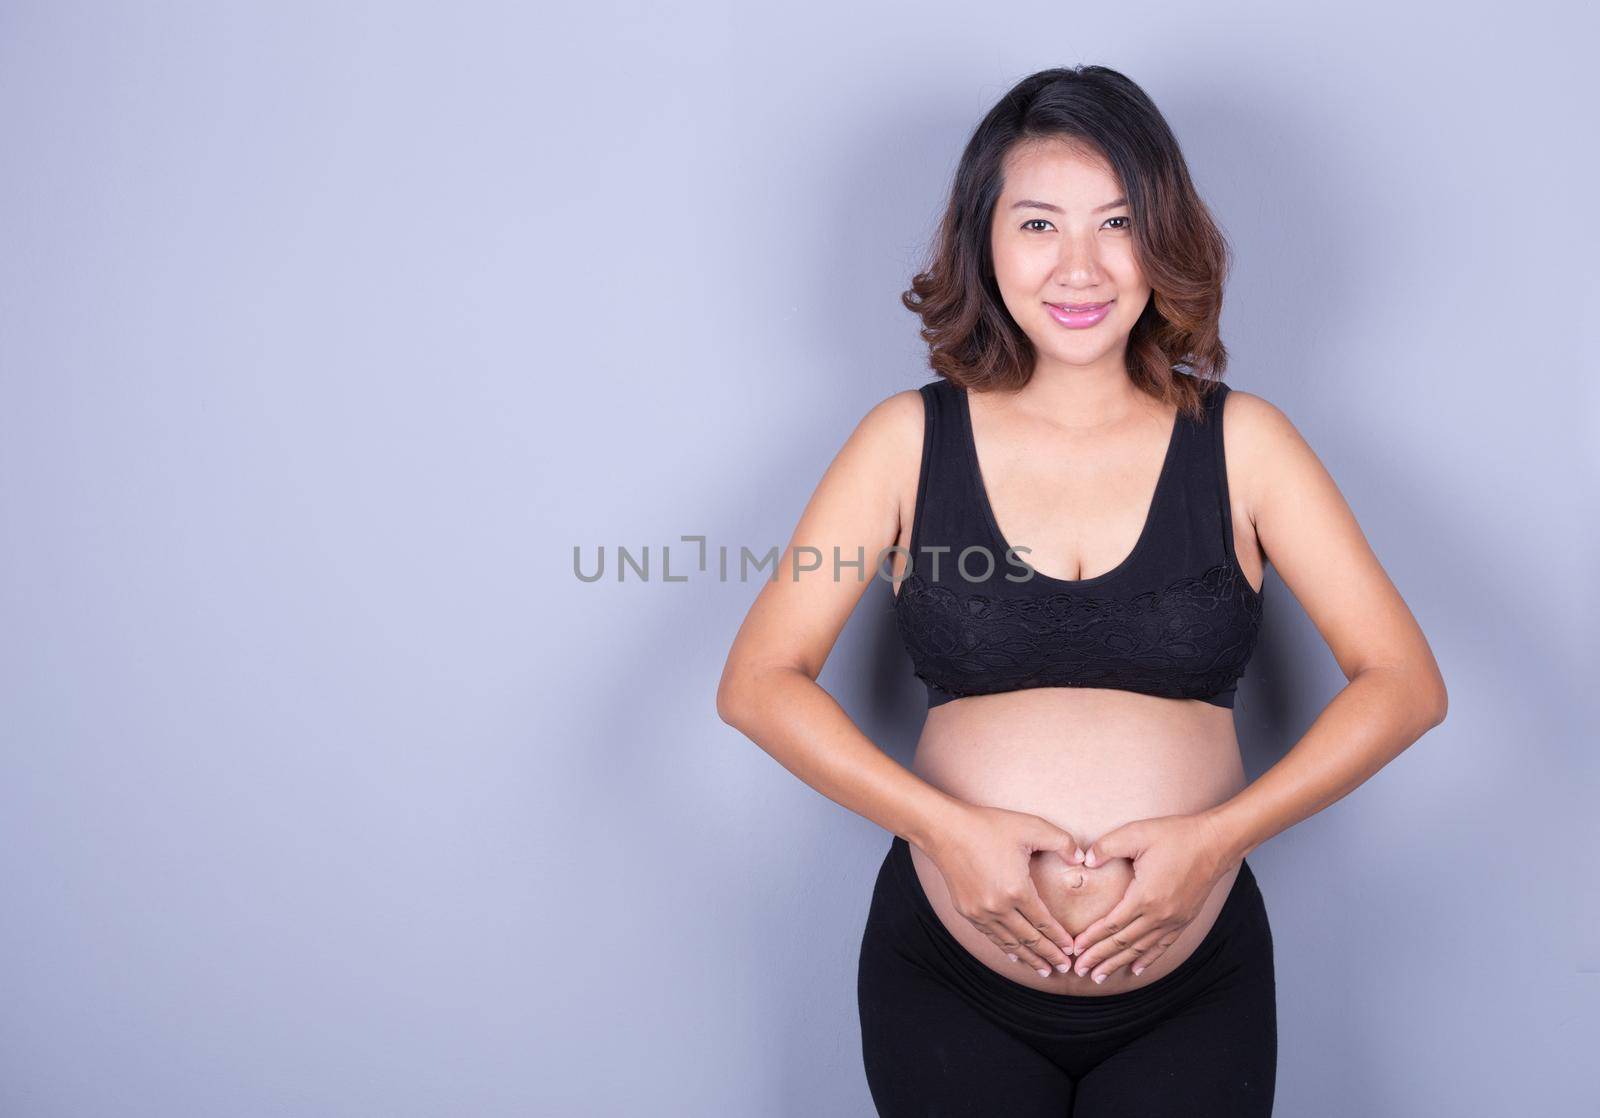 Pregnant Woman holding her hands in a heart shape on her belly